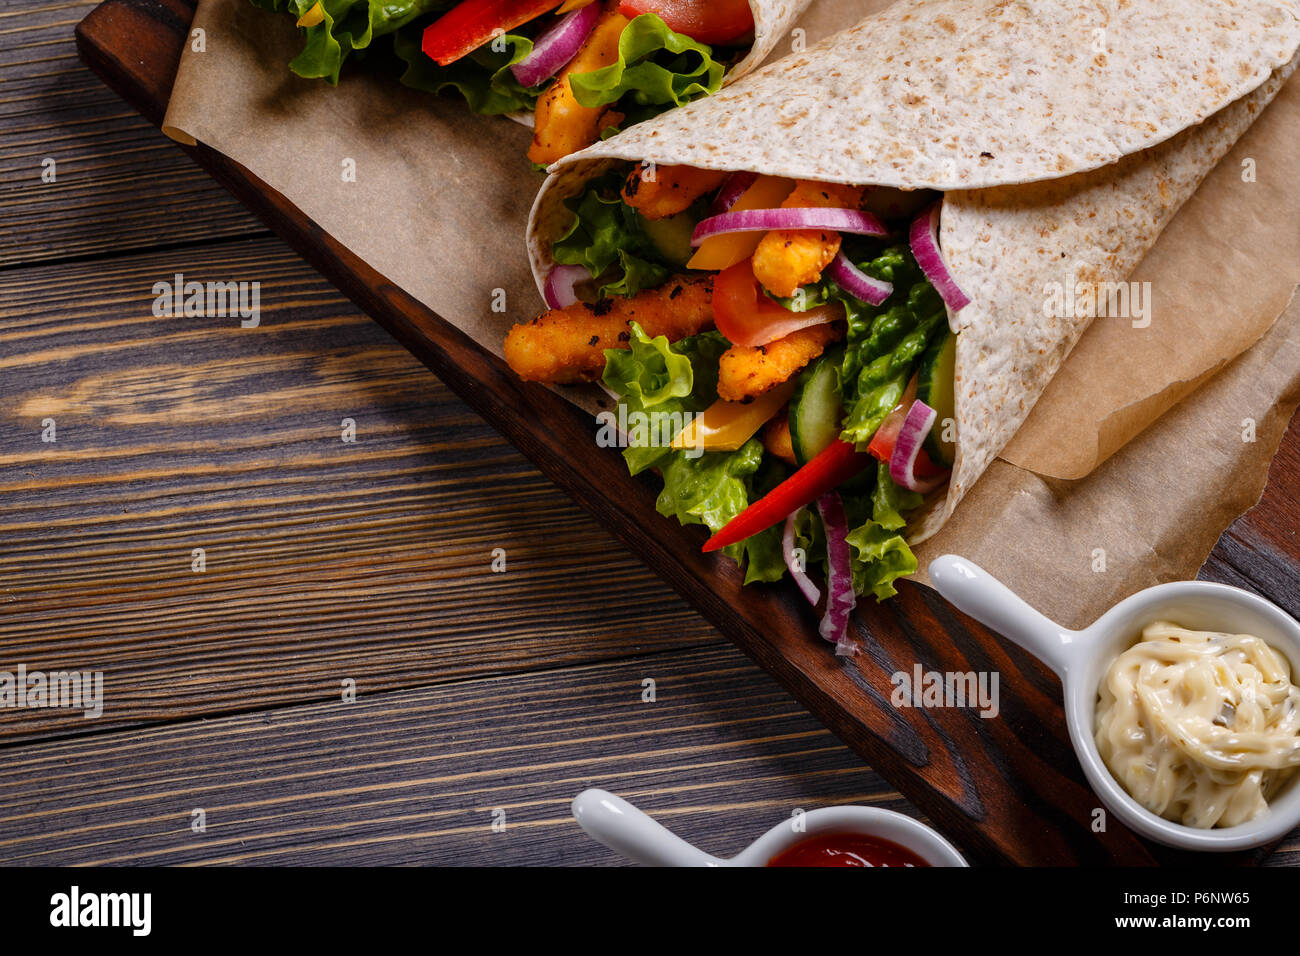 Mexican special: Tortilla with chicken and vegetables Stock Photo - Alamy